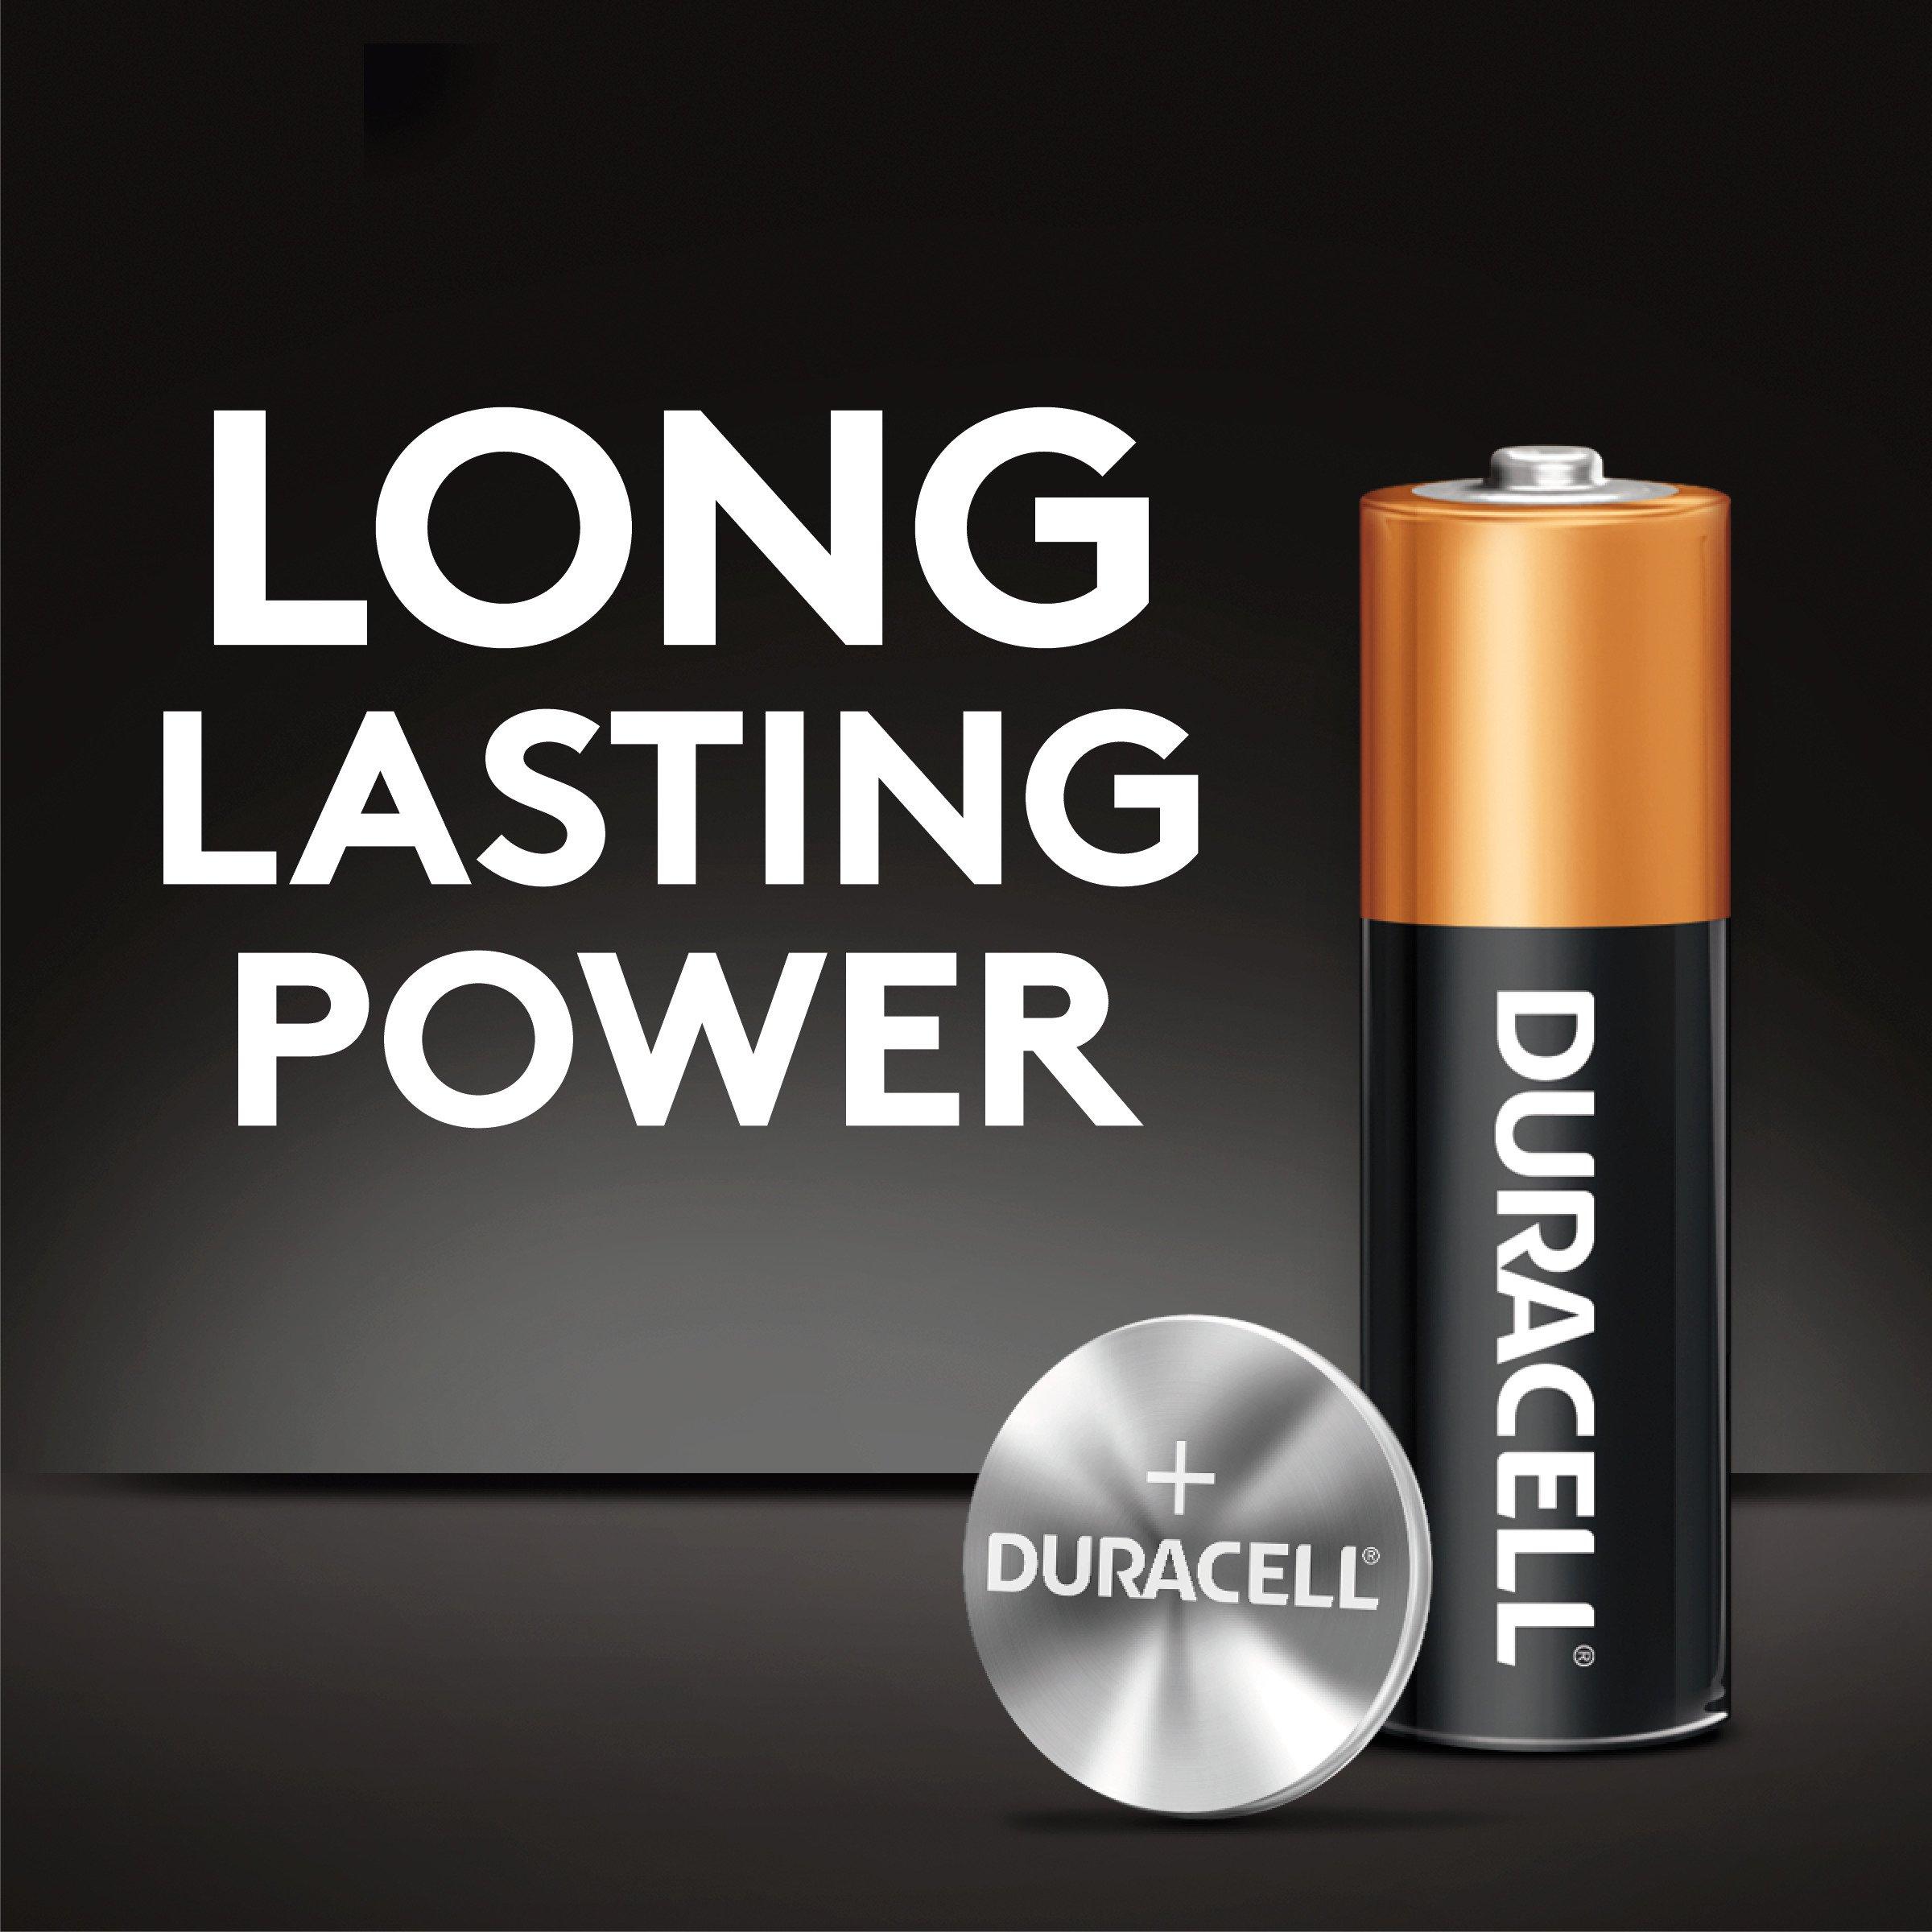 Duracell Coppertop AA Batteries 8 Pack